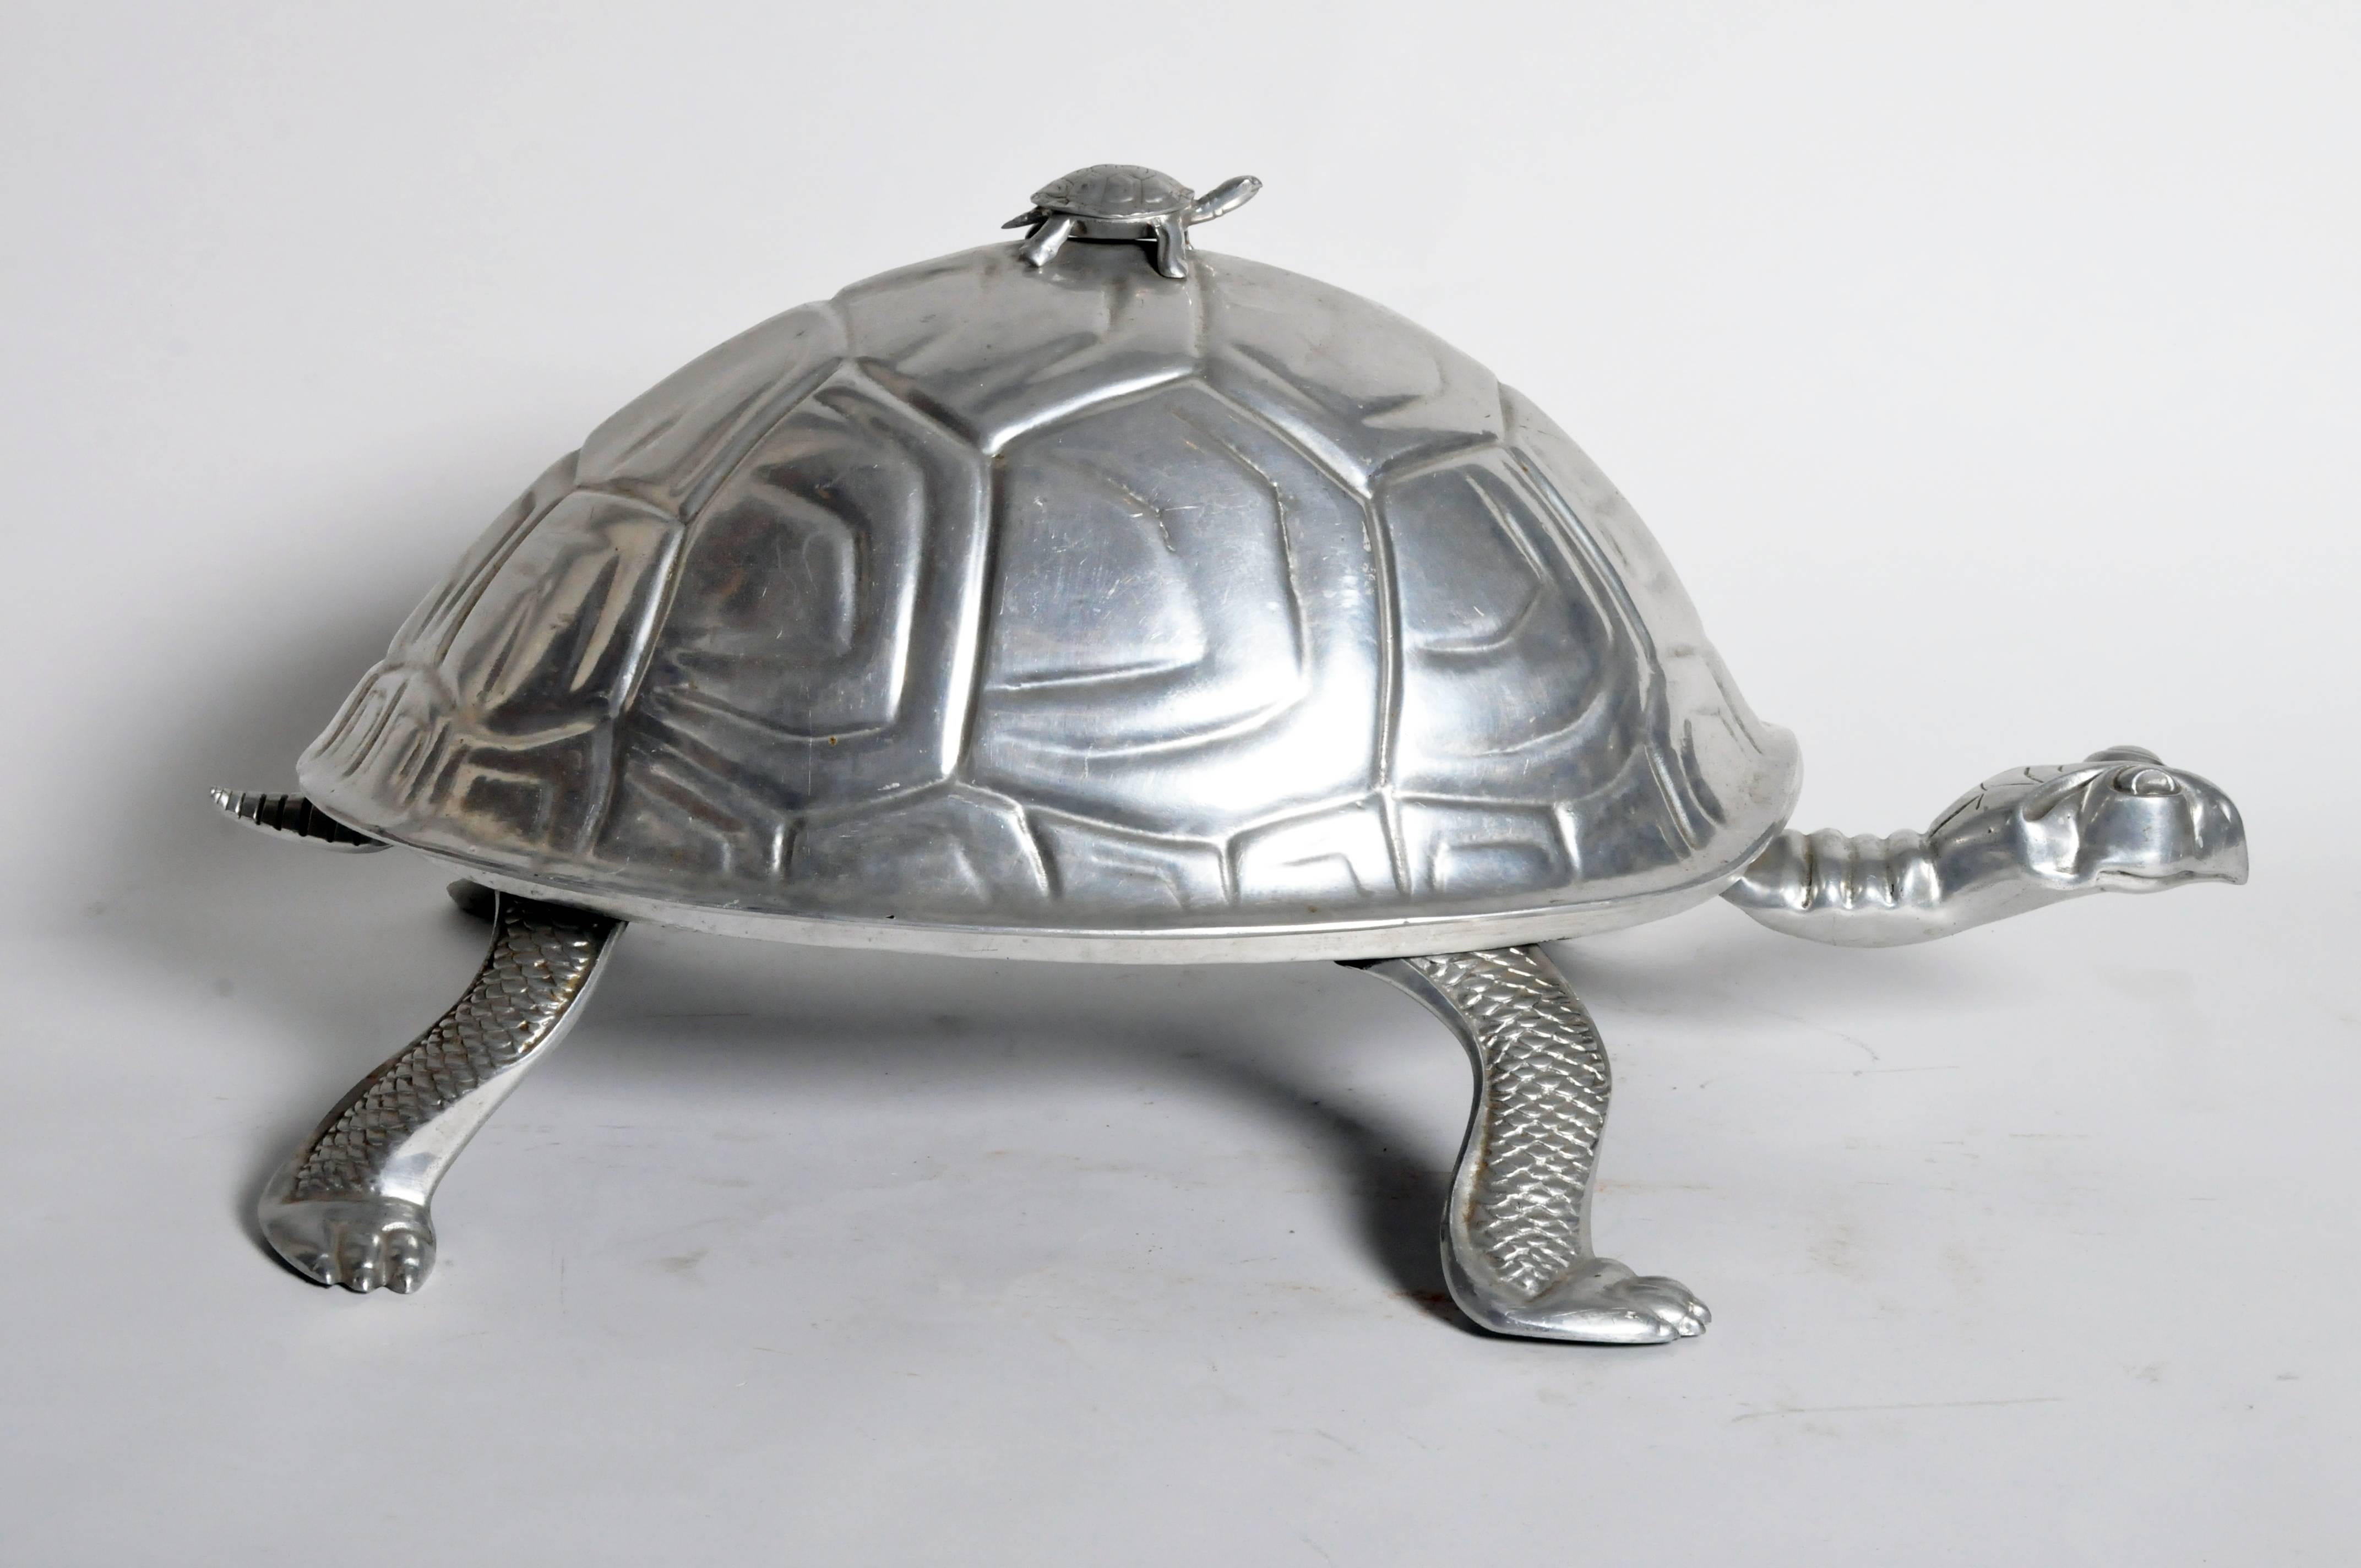 In the form of a tortoise, this slow and steady creature becomes spacious centerpiece for a savory roast or bird. A removable wood carving board rests underneath the shell-form lid, which has a smaller tortoise-form finial.